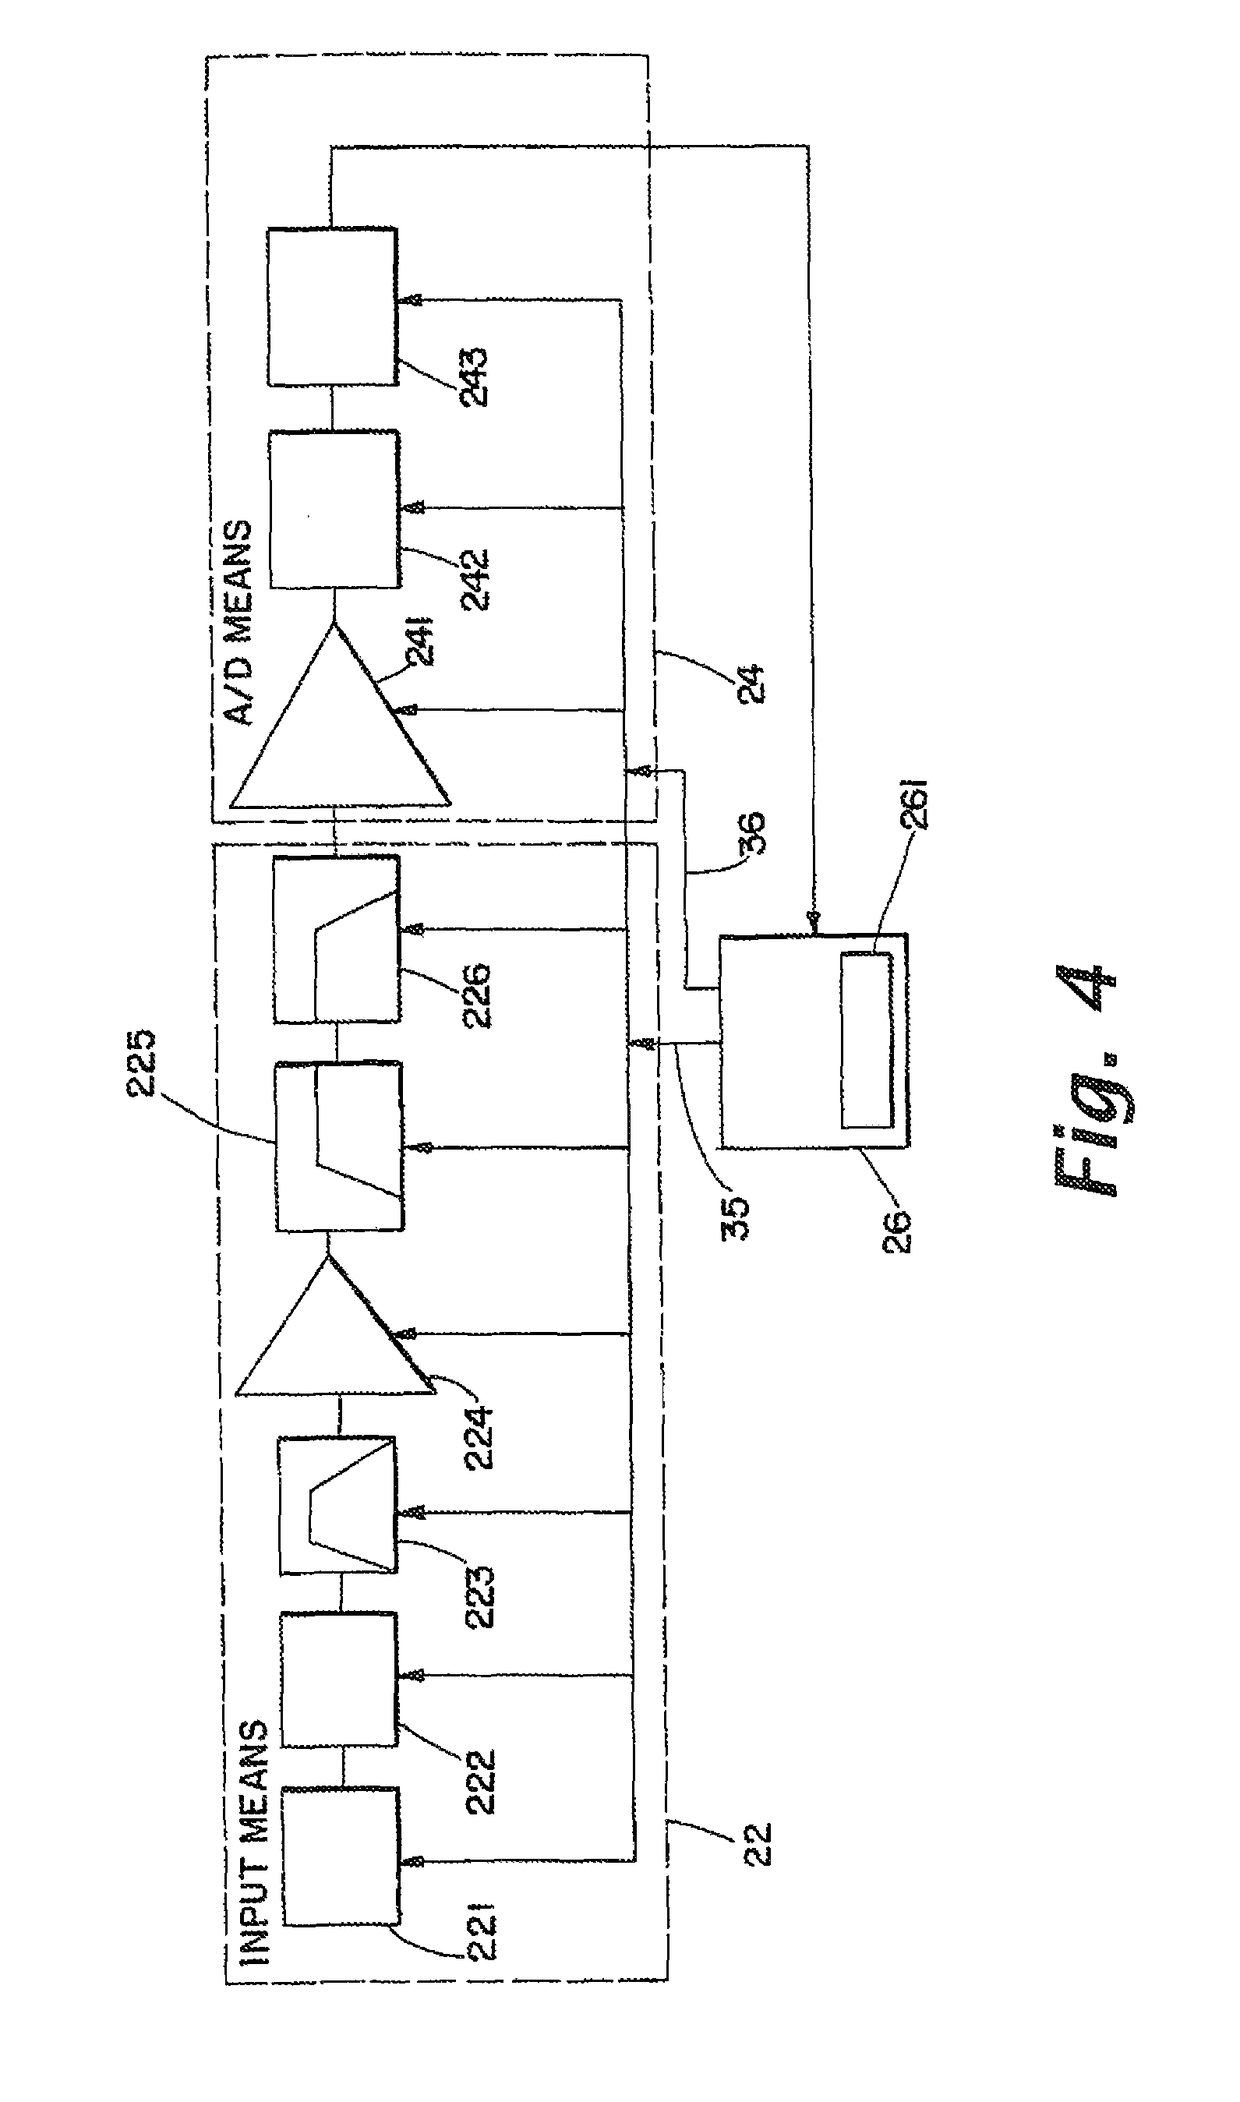 Integrated sleep diagnostic and therapeutic system and method